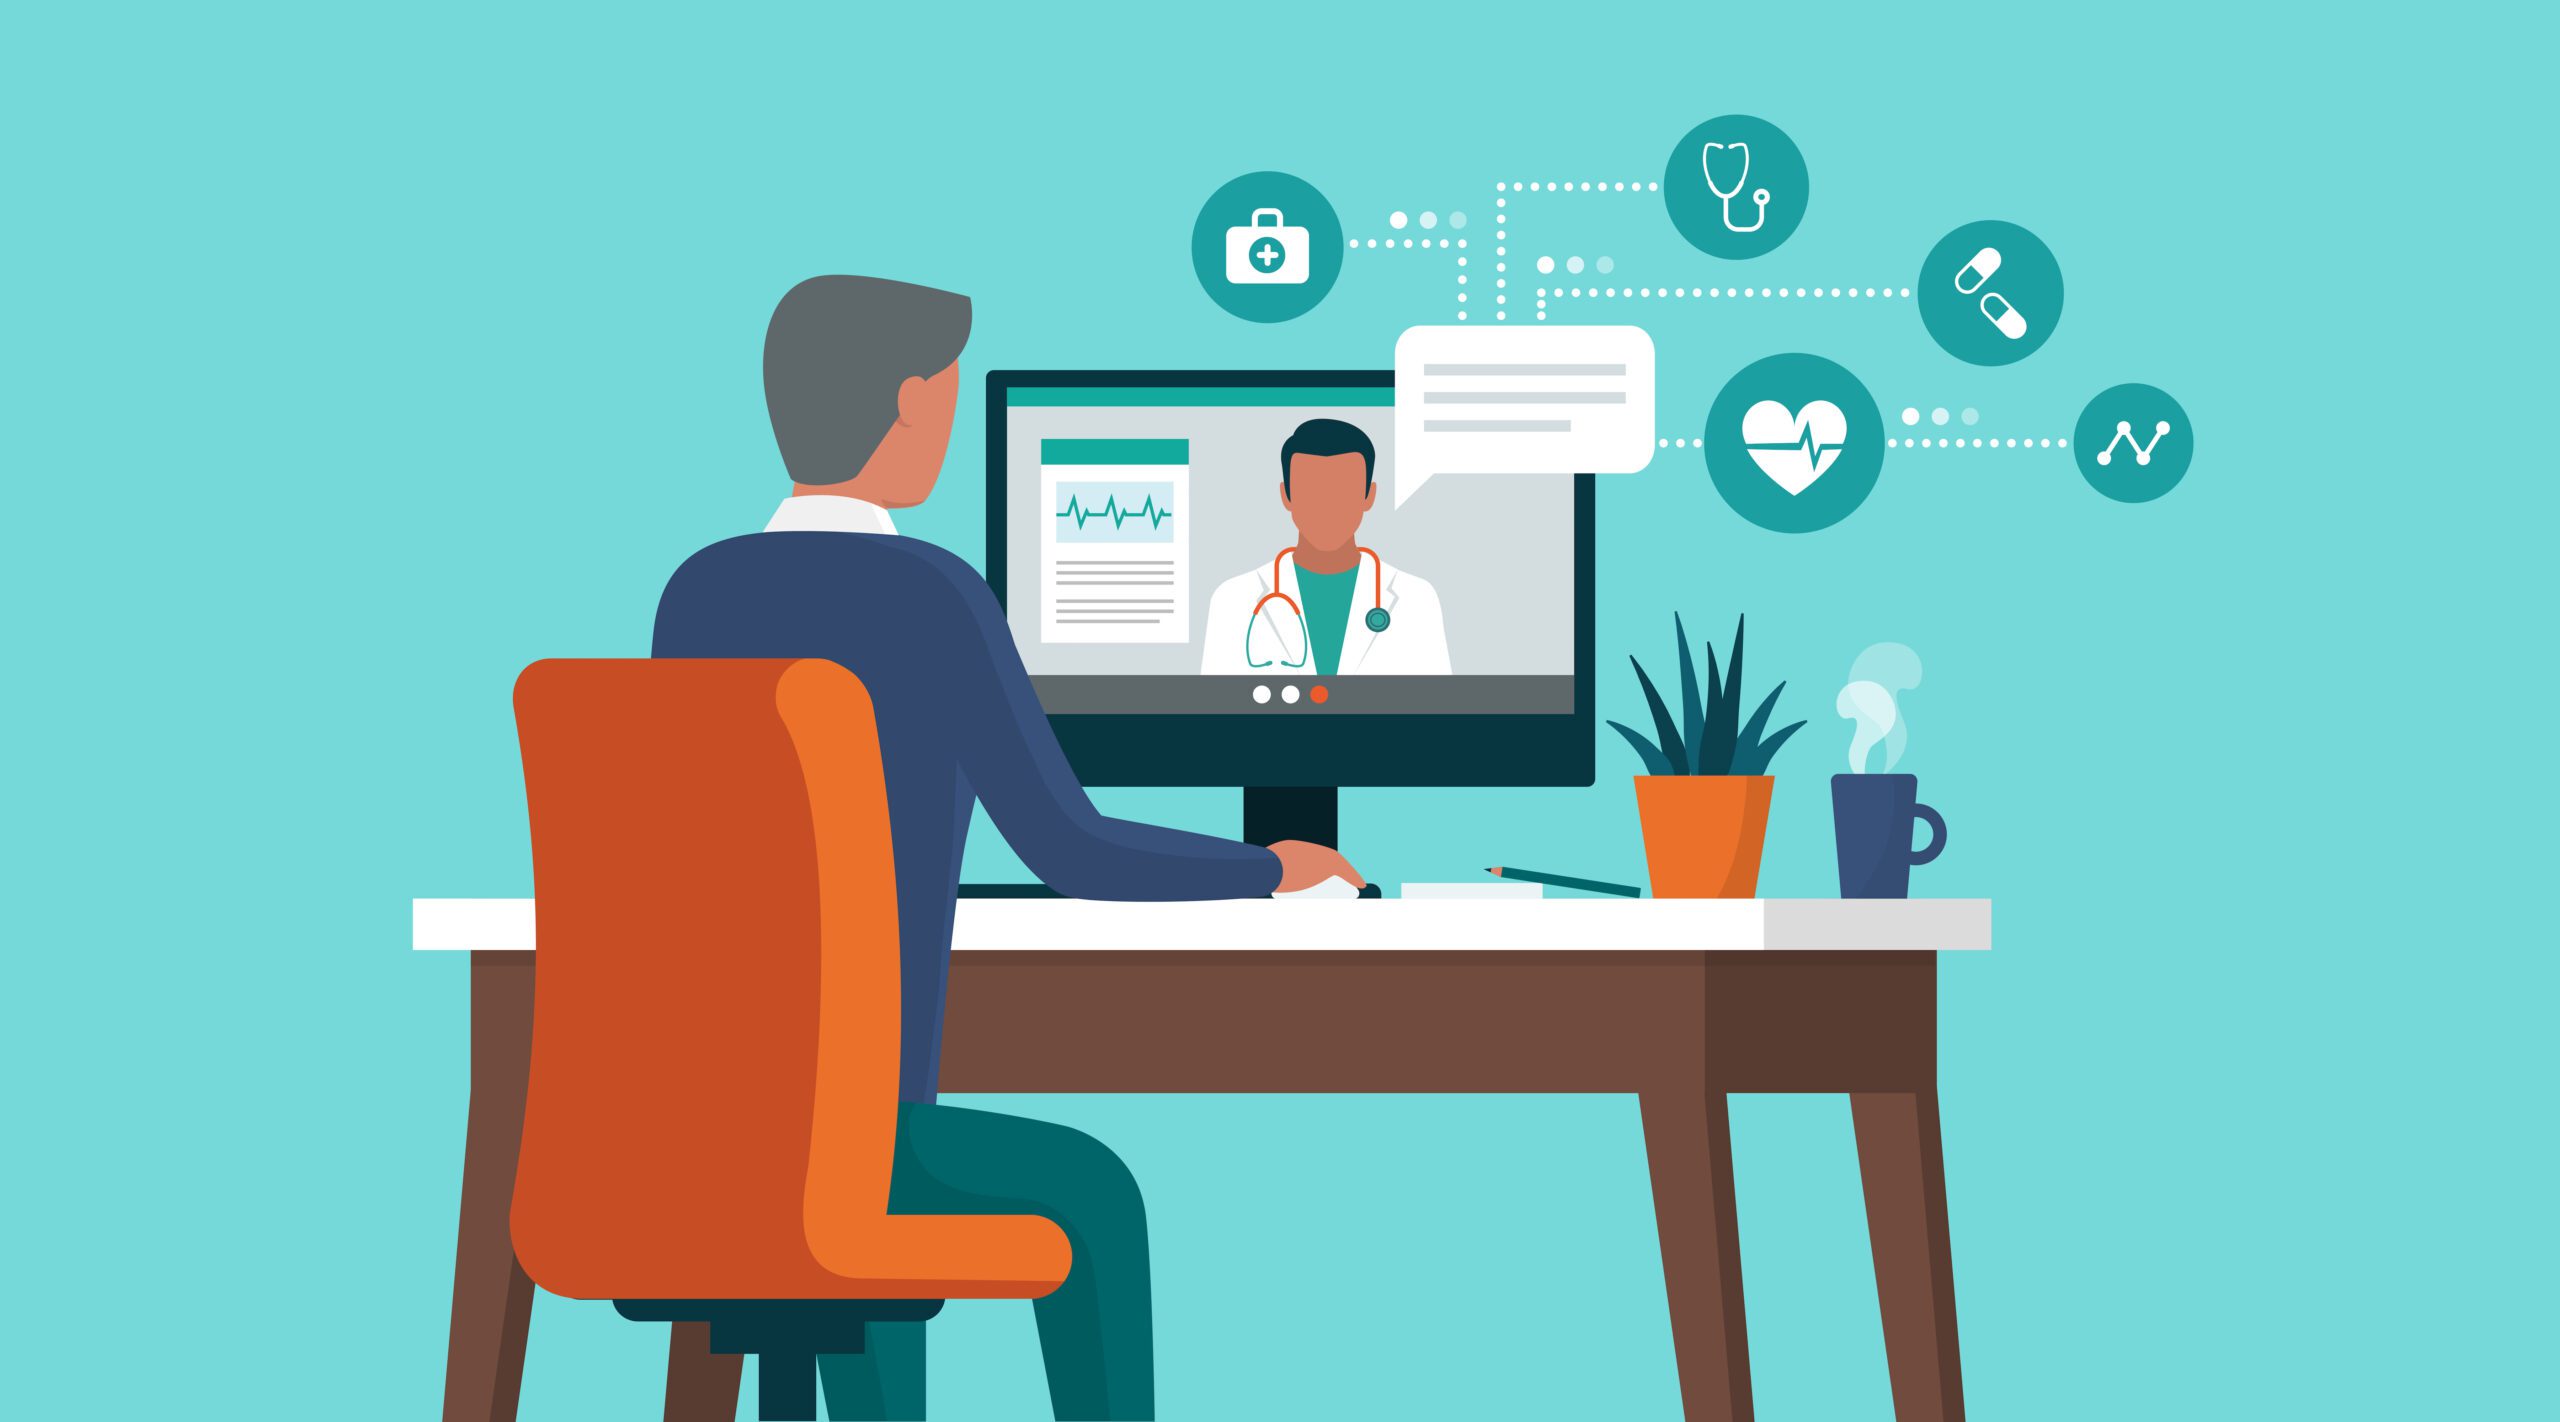 How Should Providers Adapt to Telehealth’s New Era? - MedCity News